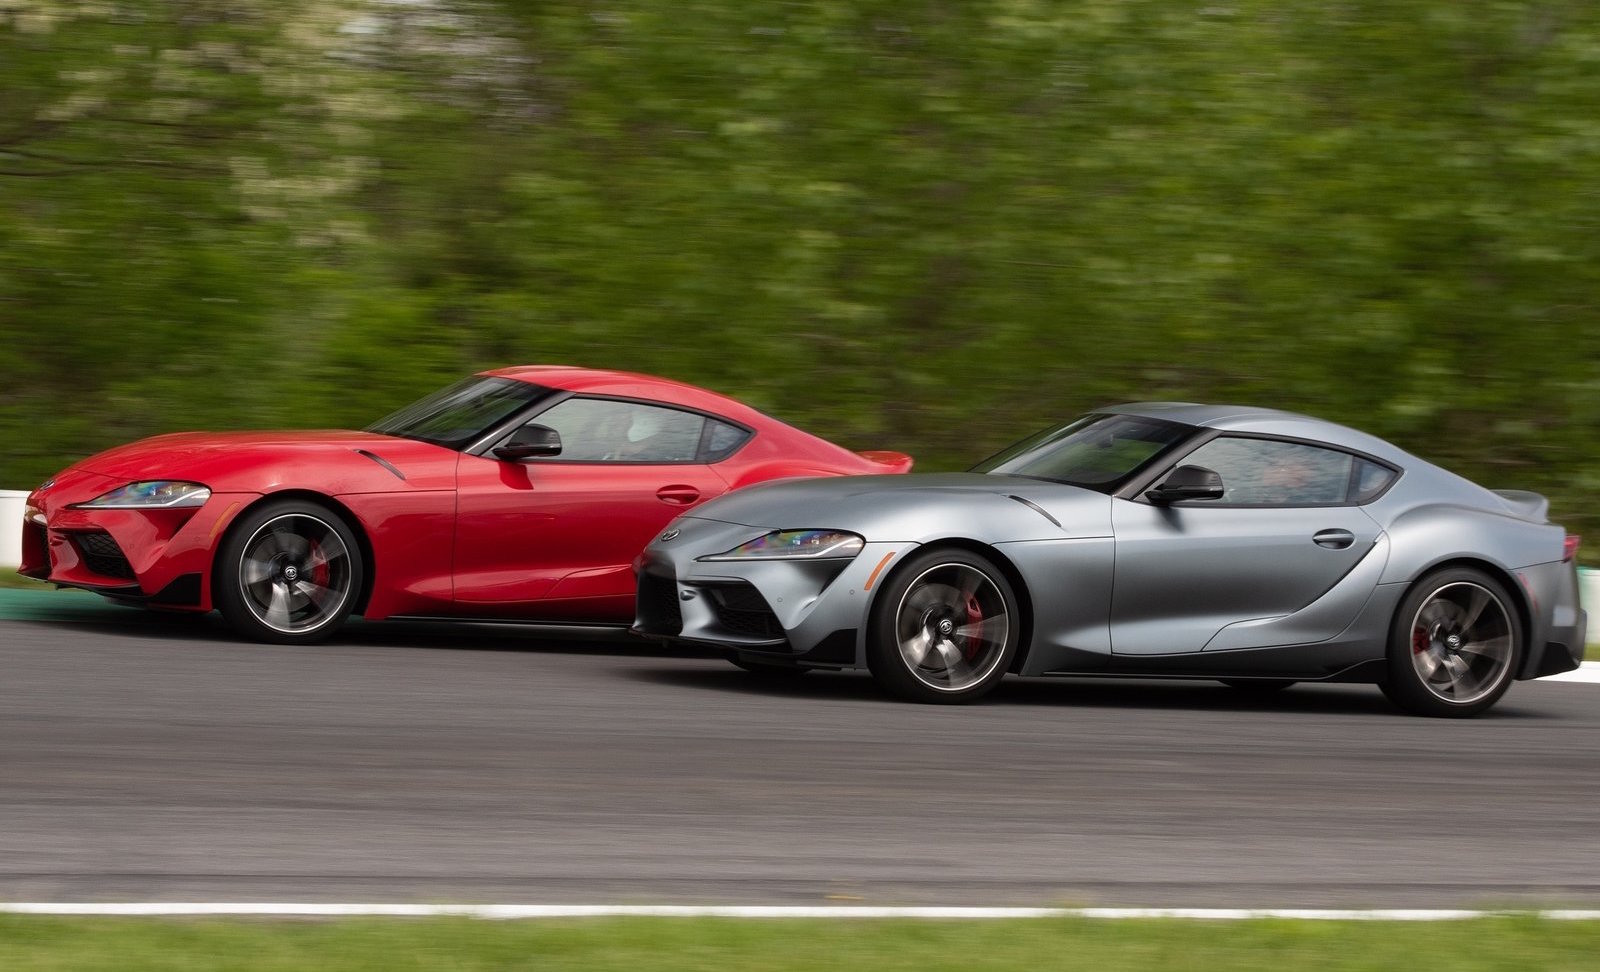 First Australian Toyota GR Supra allocation sells out in 7 minutes